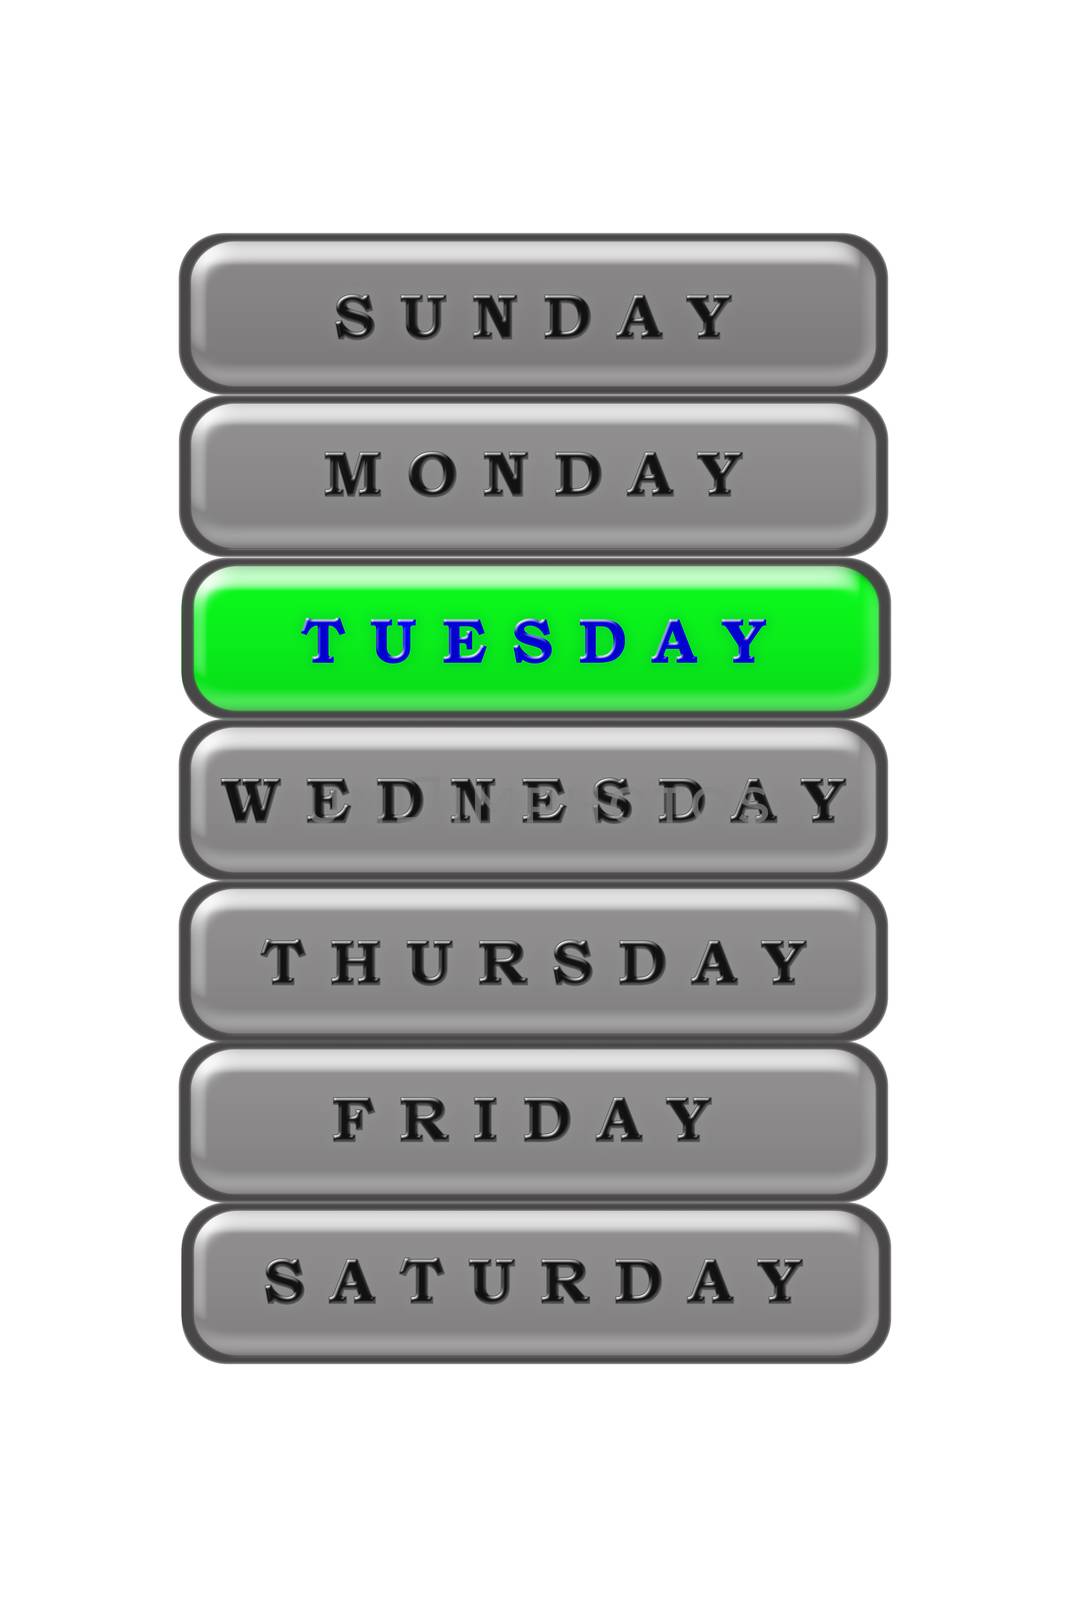 In the days of the week list, Tuesday is highlighted in blue on  by Grommik